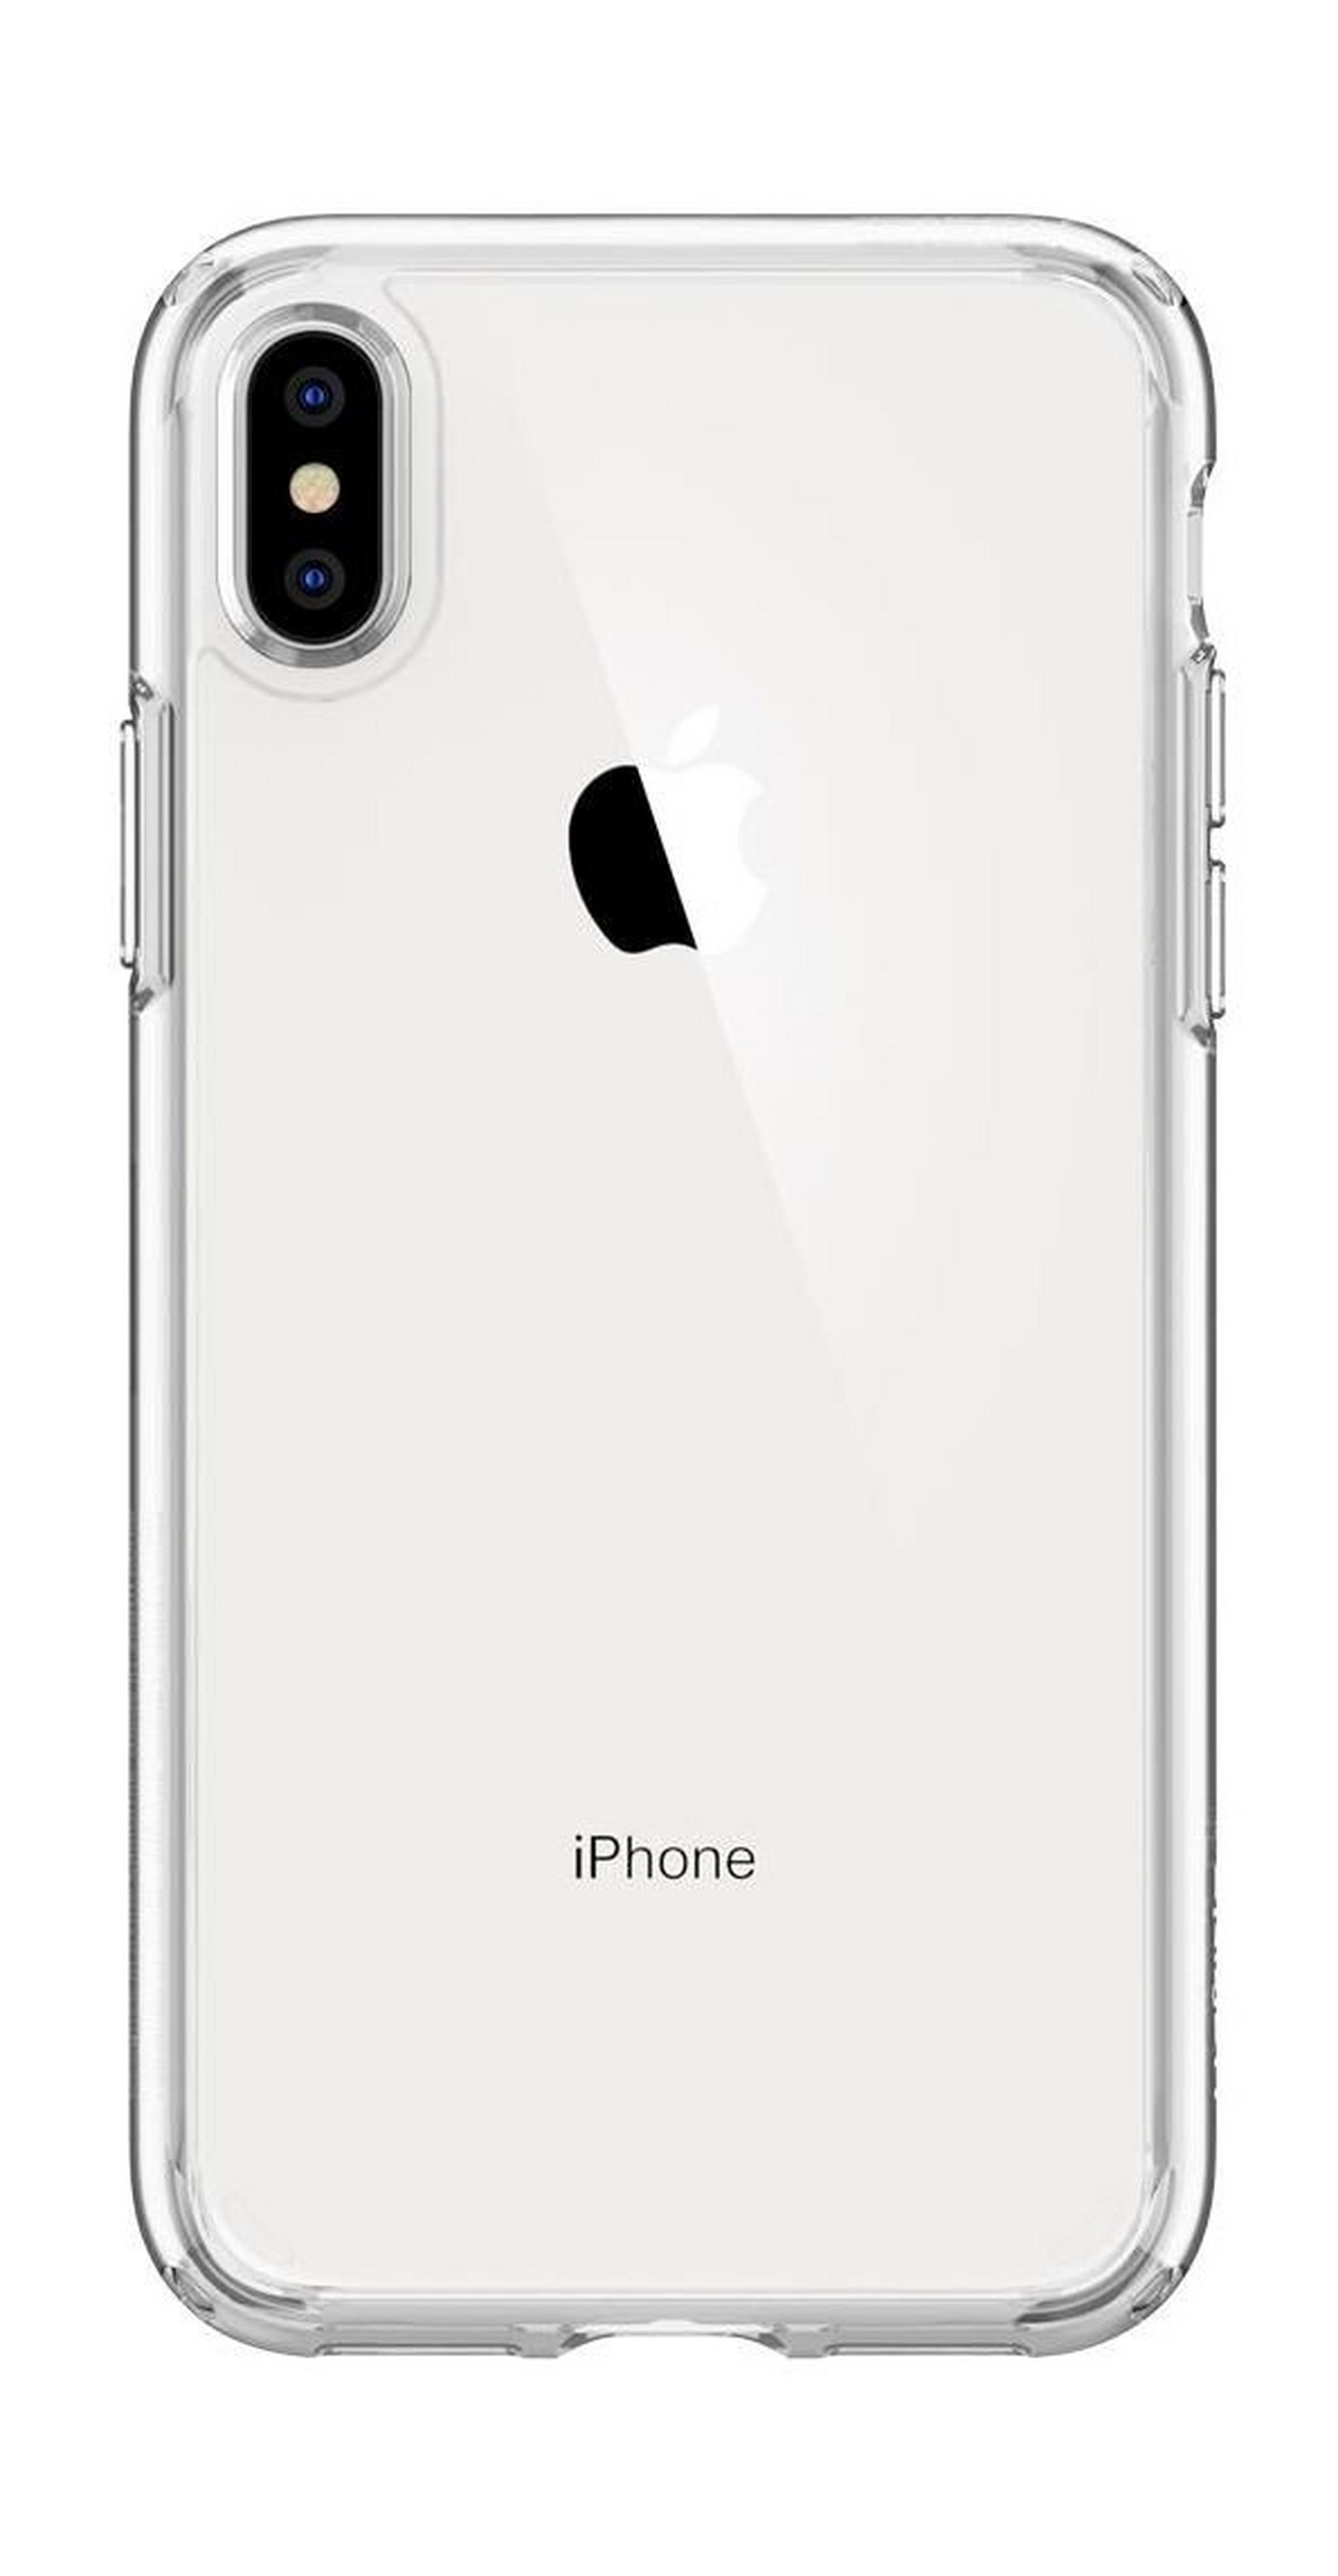 Spigen Ultra Hybrid Crystal Case For iPhone XS Max (065CS25127) - Clear